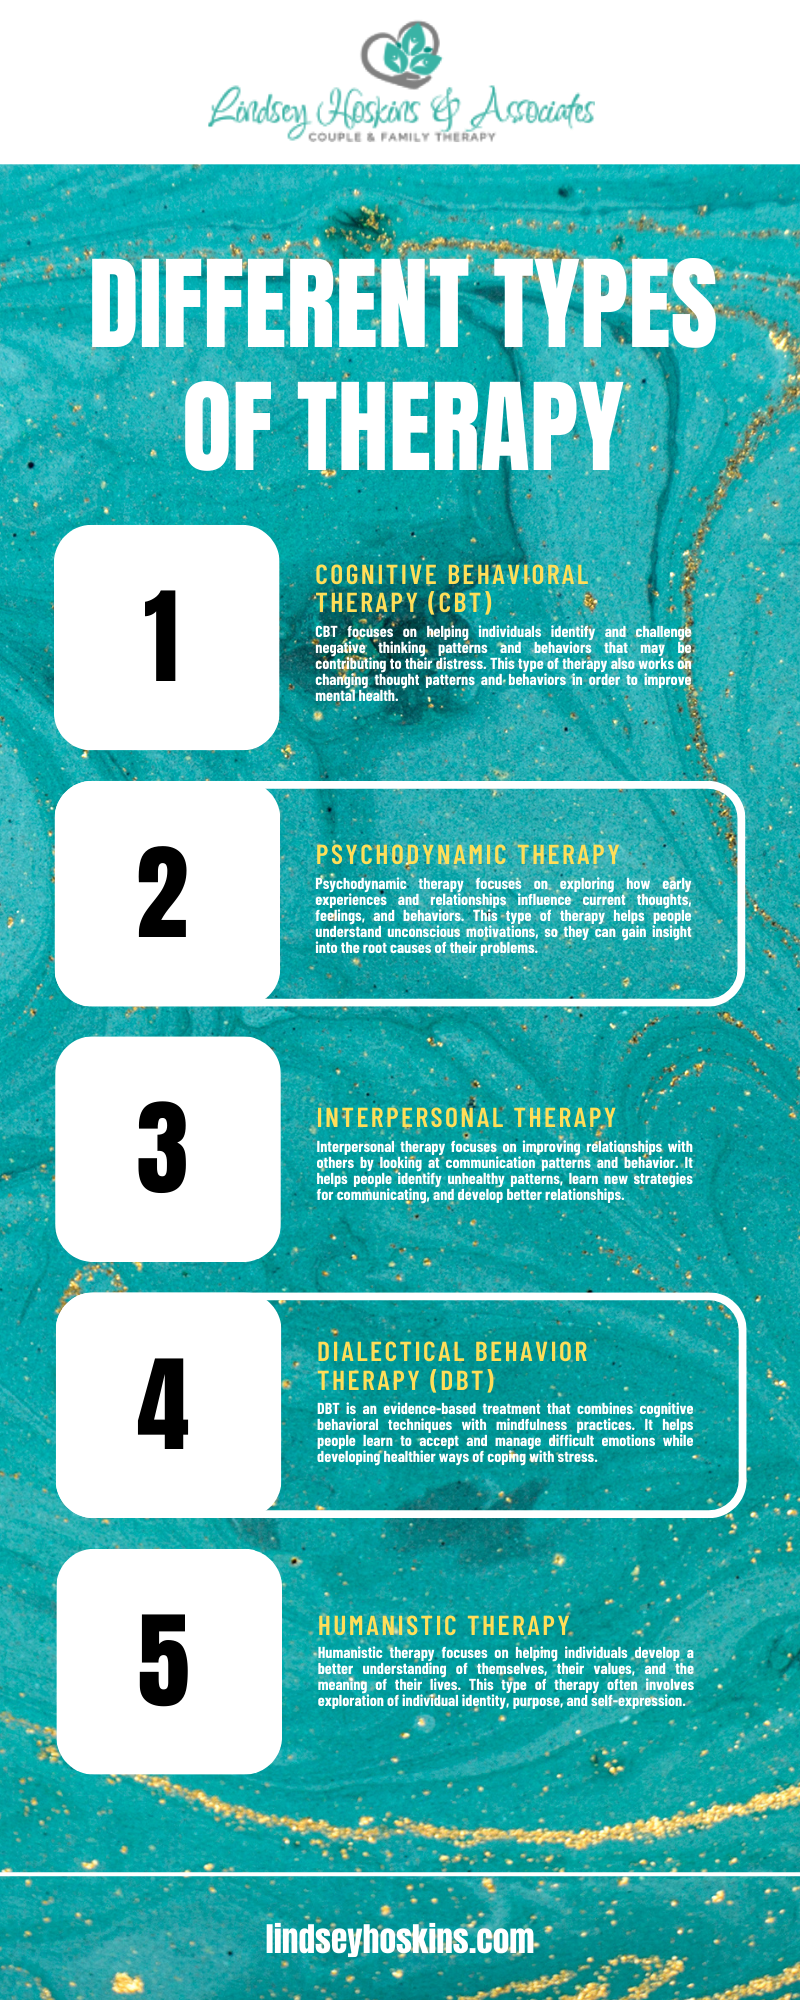 DIFFERENT TYPES OF THERAPY INFOGRAPHIC